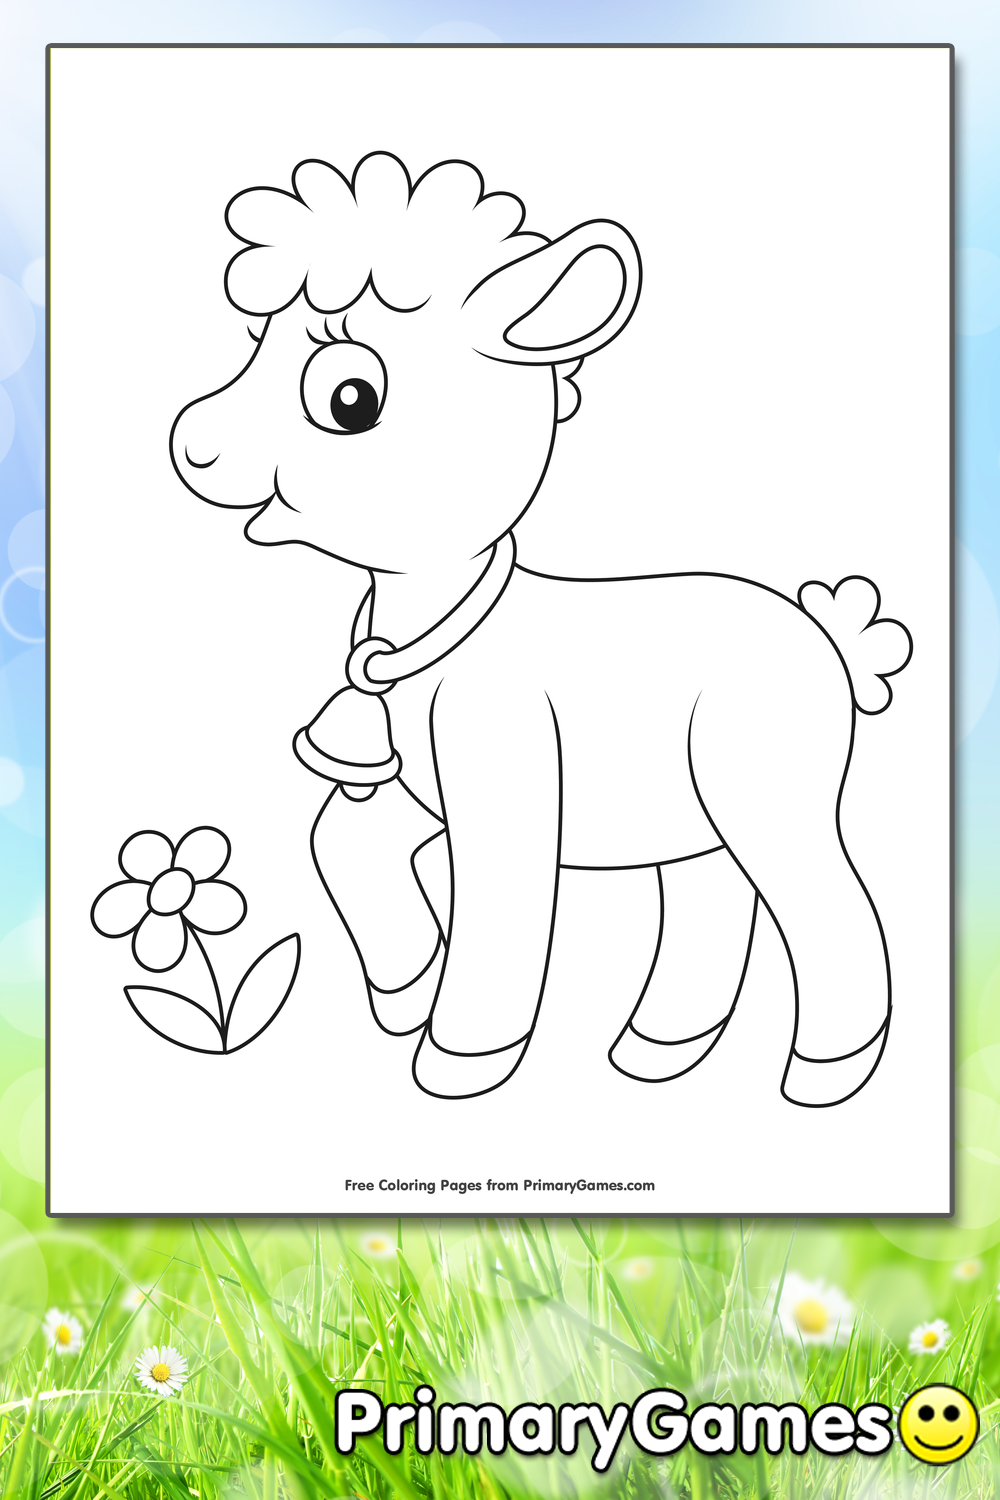 Baby Lamb Coloring Page • FREE Printable PDF from PrimaryGames